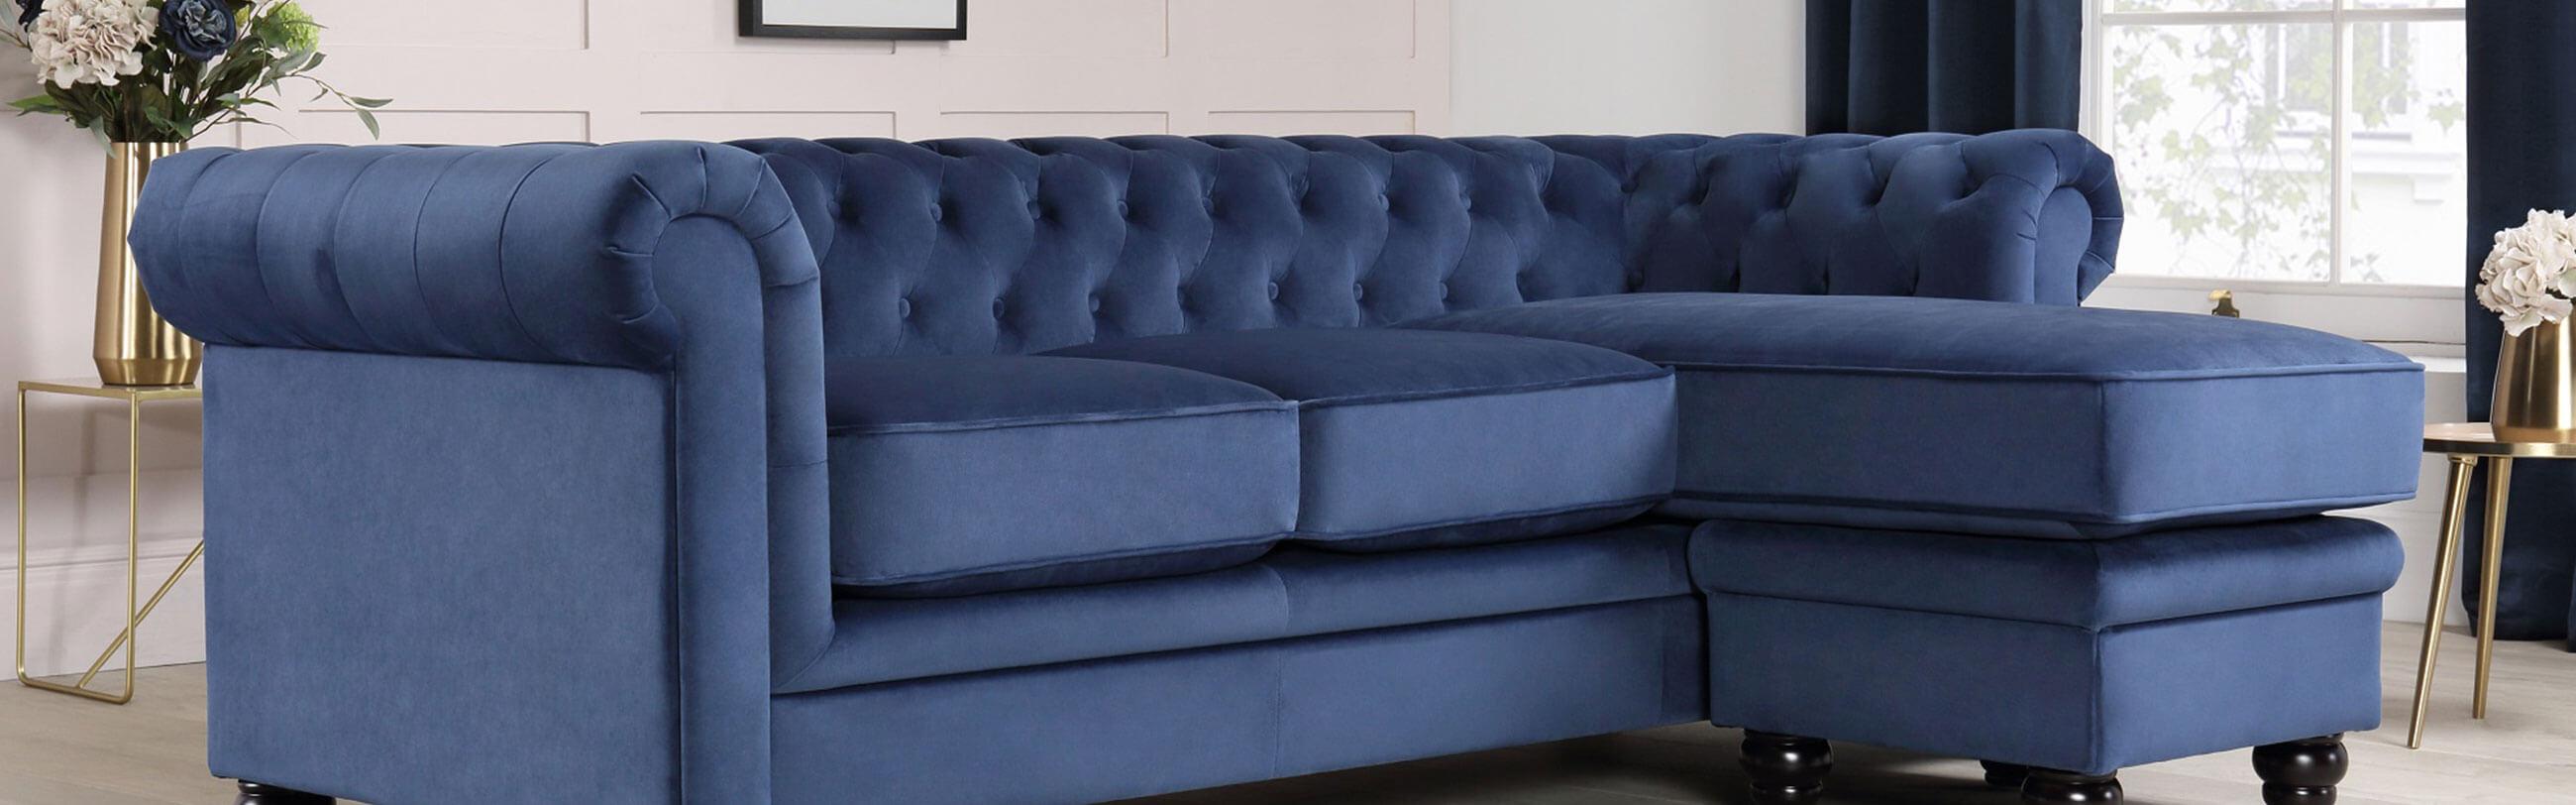 8 Ways To Style The Chesterfield Sofa, Styles Of Chesterfield Sofas